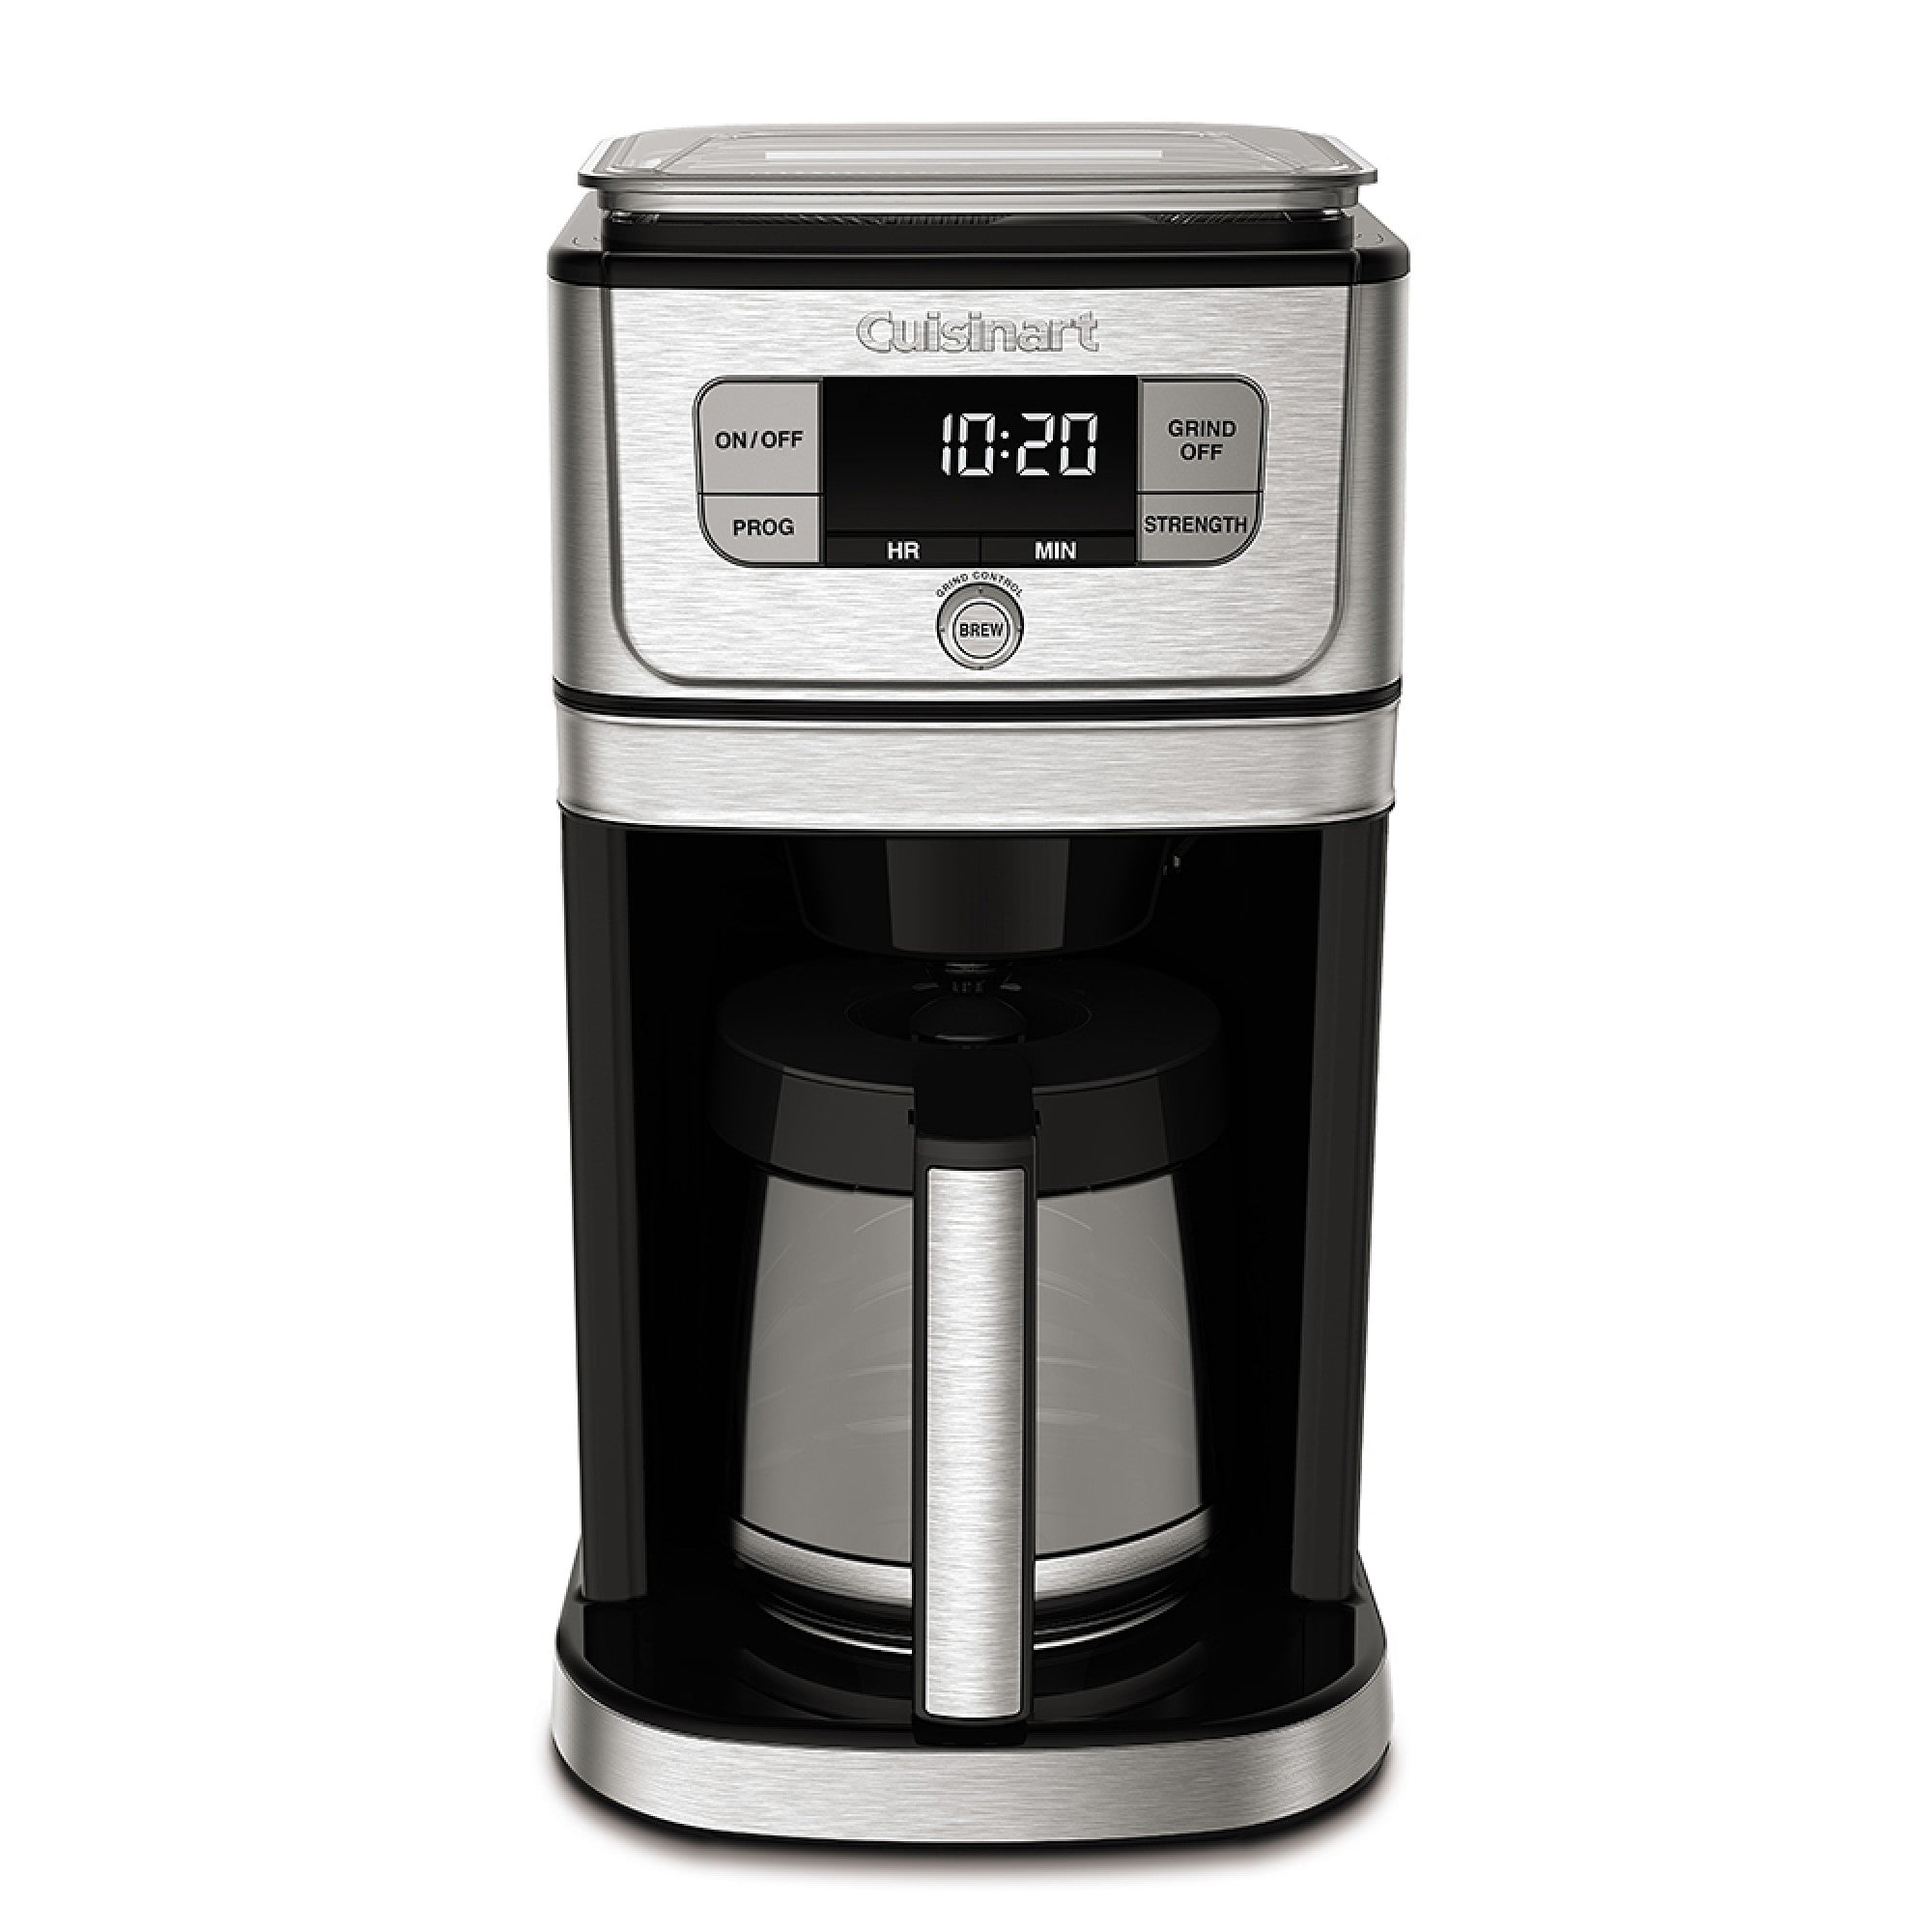 Cuisinart Burr Grind & Brew Coffee Maker with Glass Carafe – 12 Cup